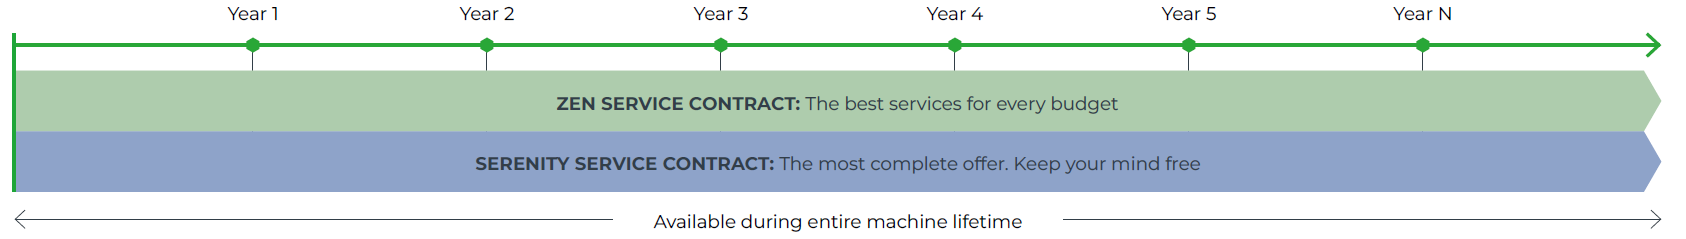 Services contracts